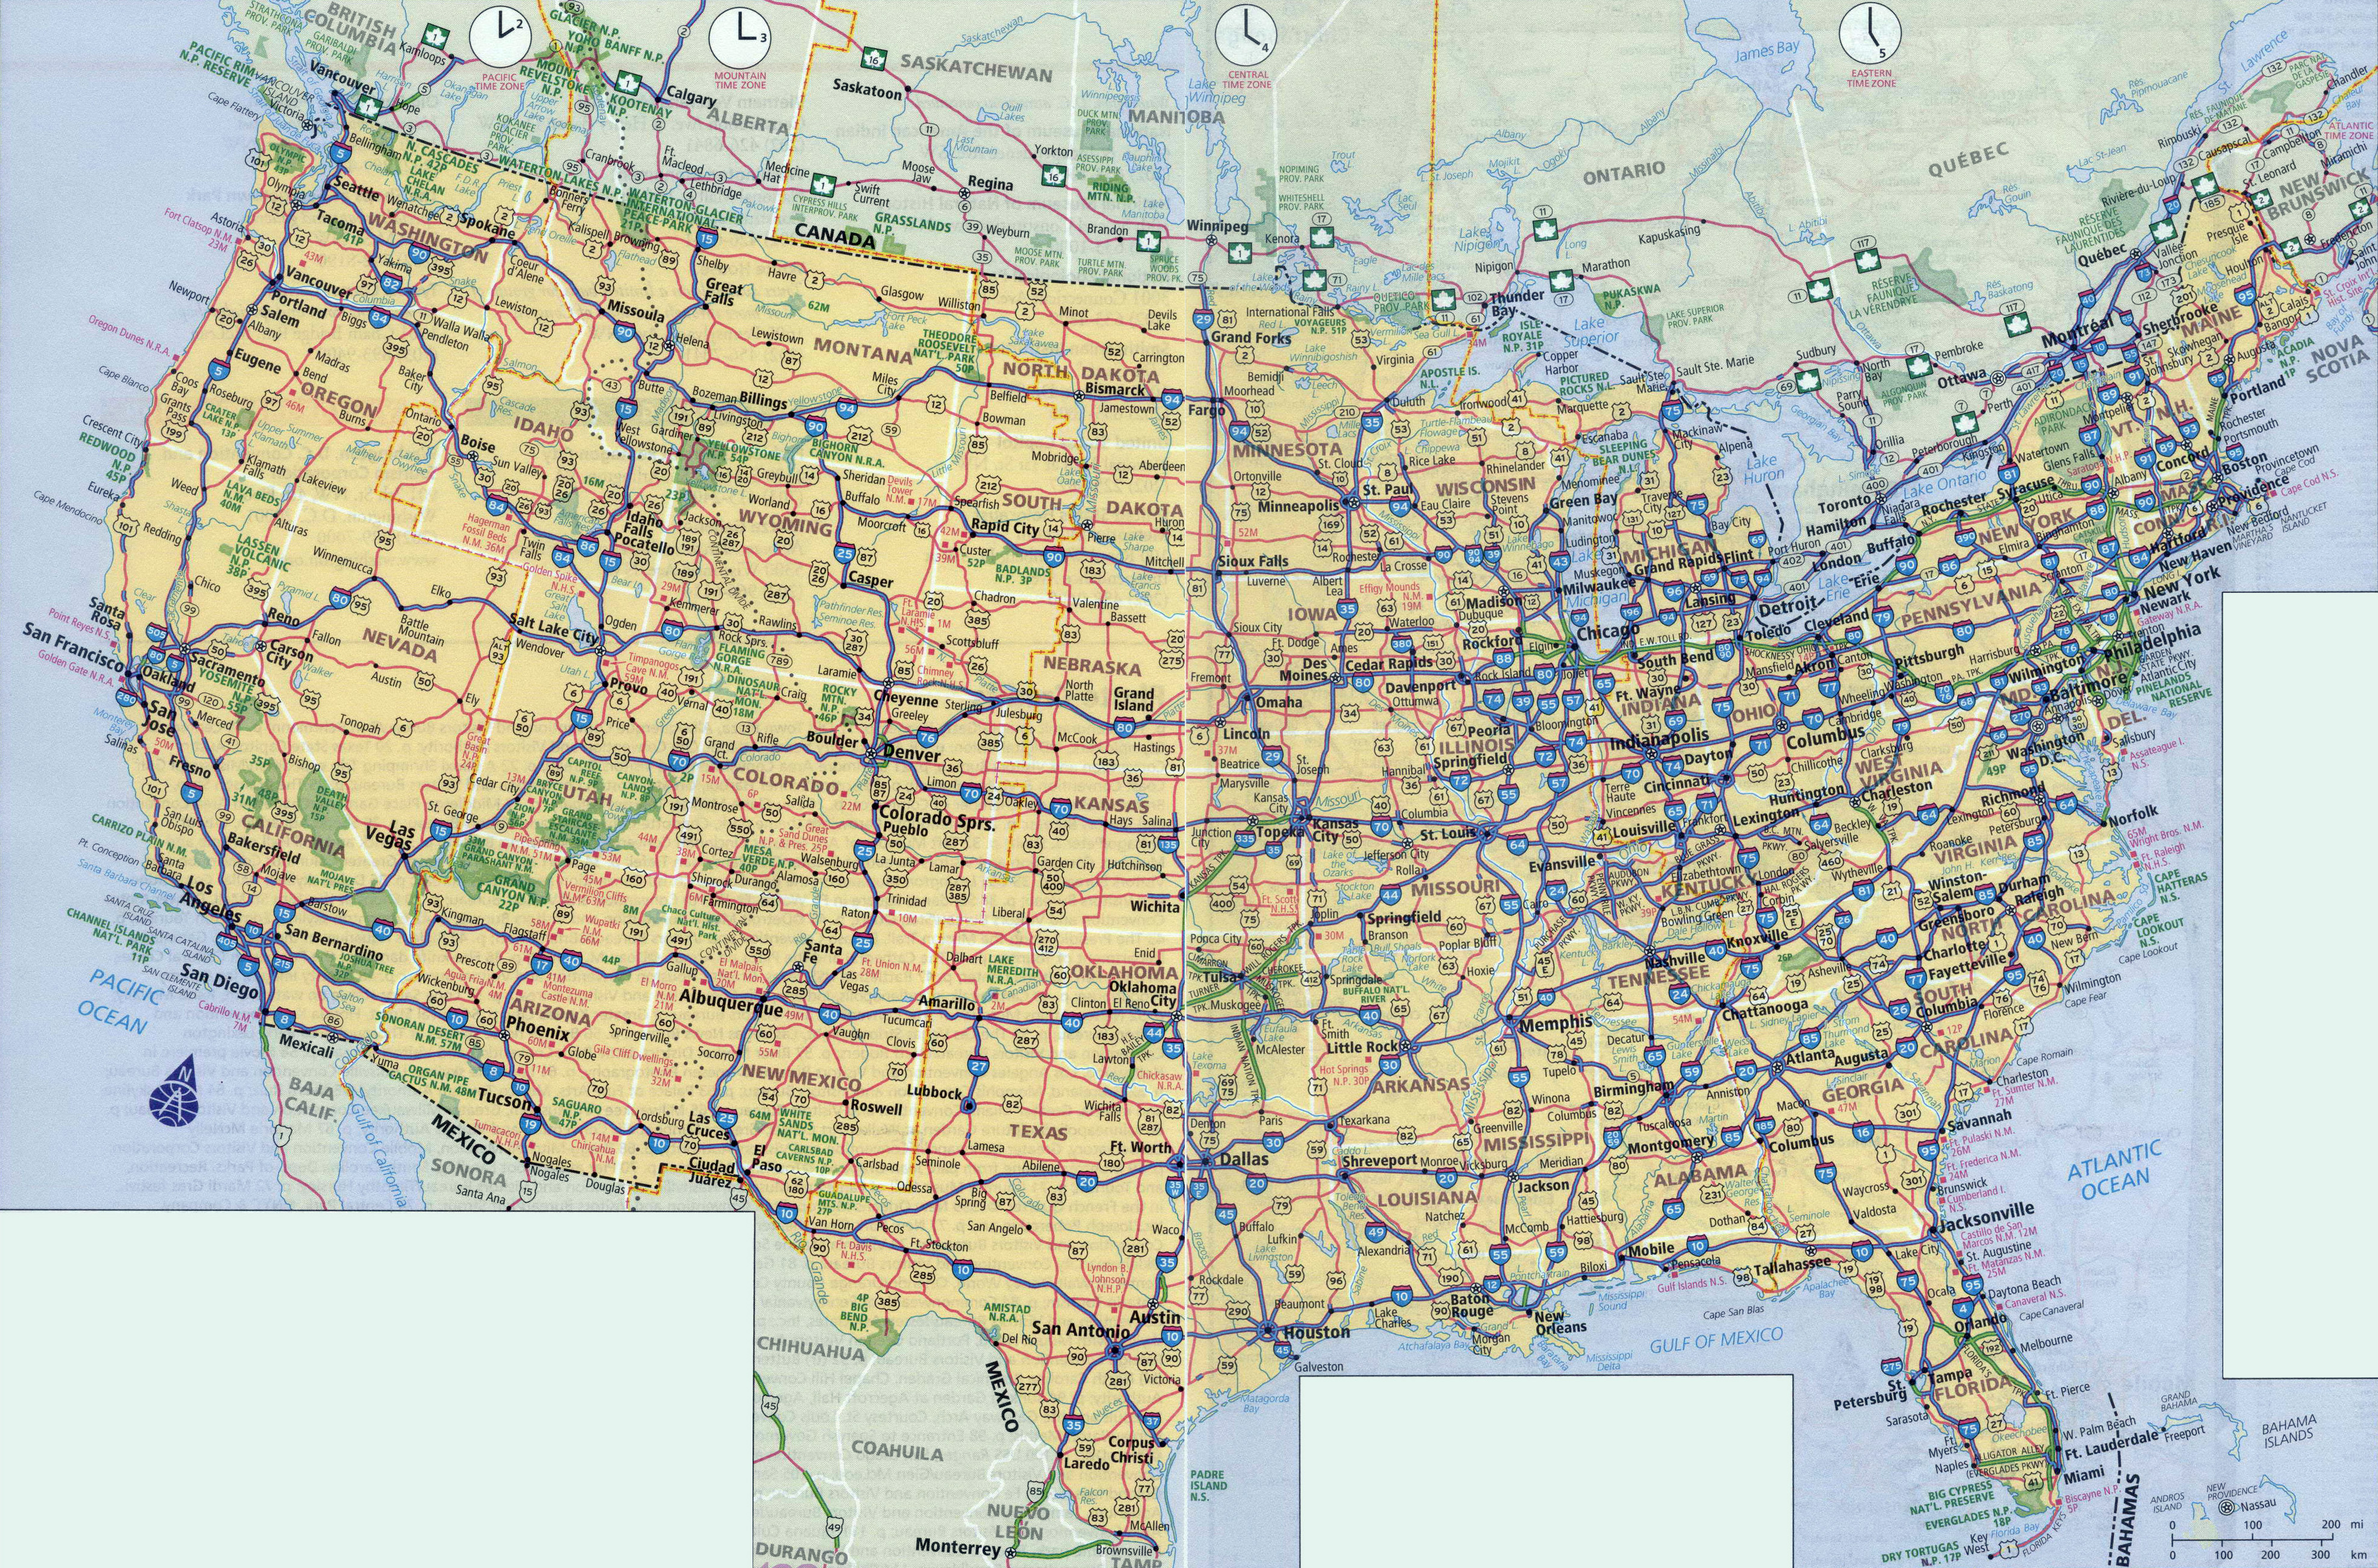 https://www.maps-of-the-usa.com/maps/usa/large-scale-highways-map-of-the-usa.jpg